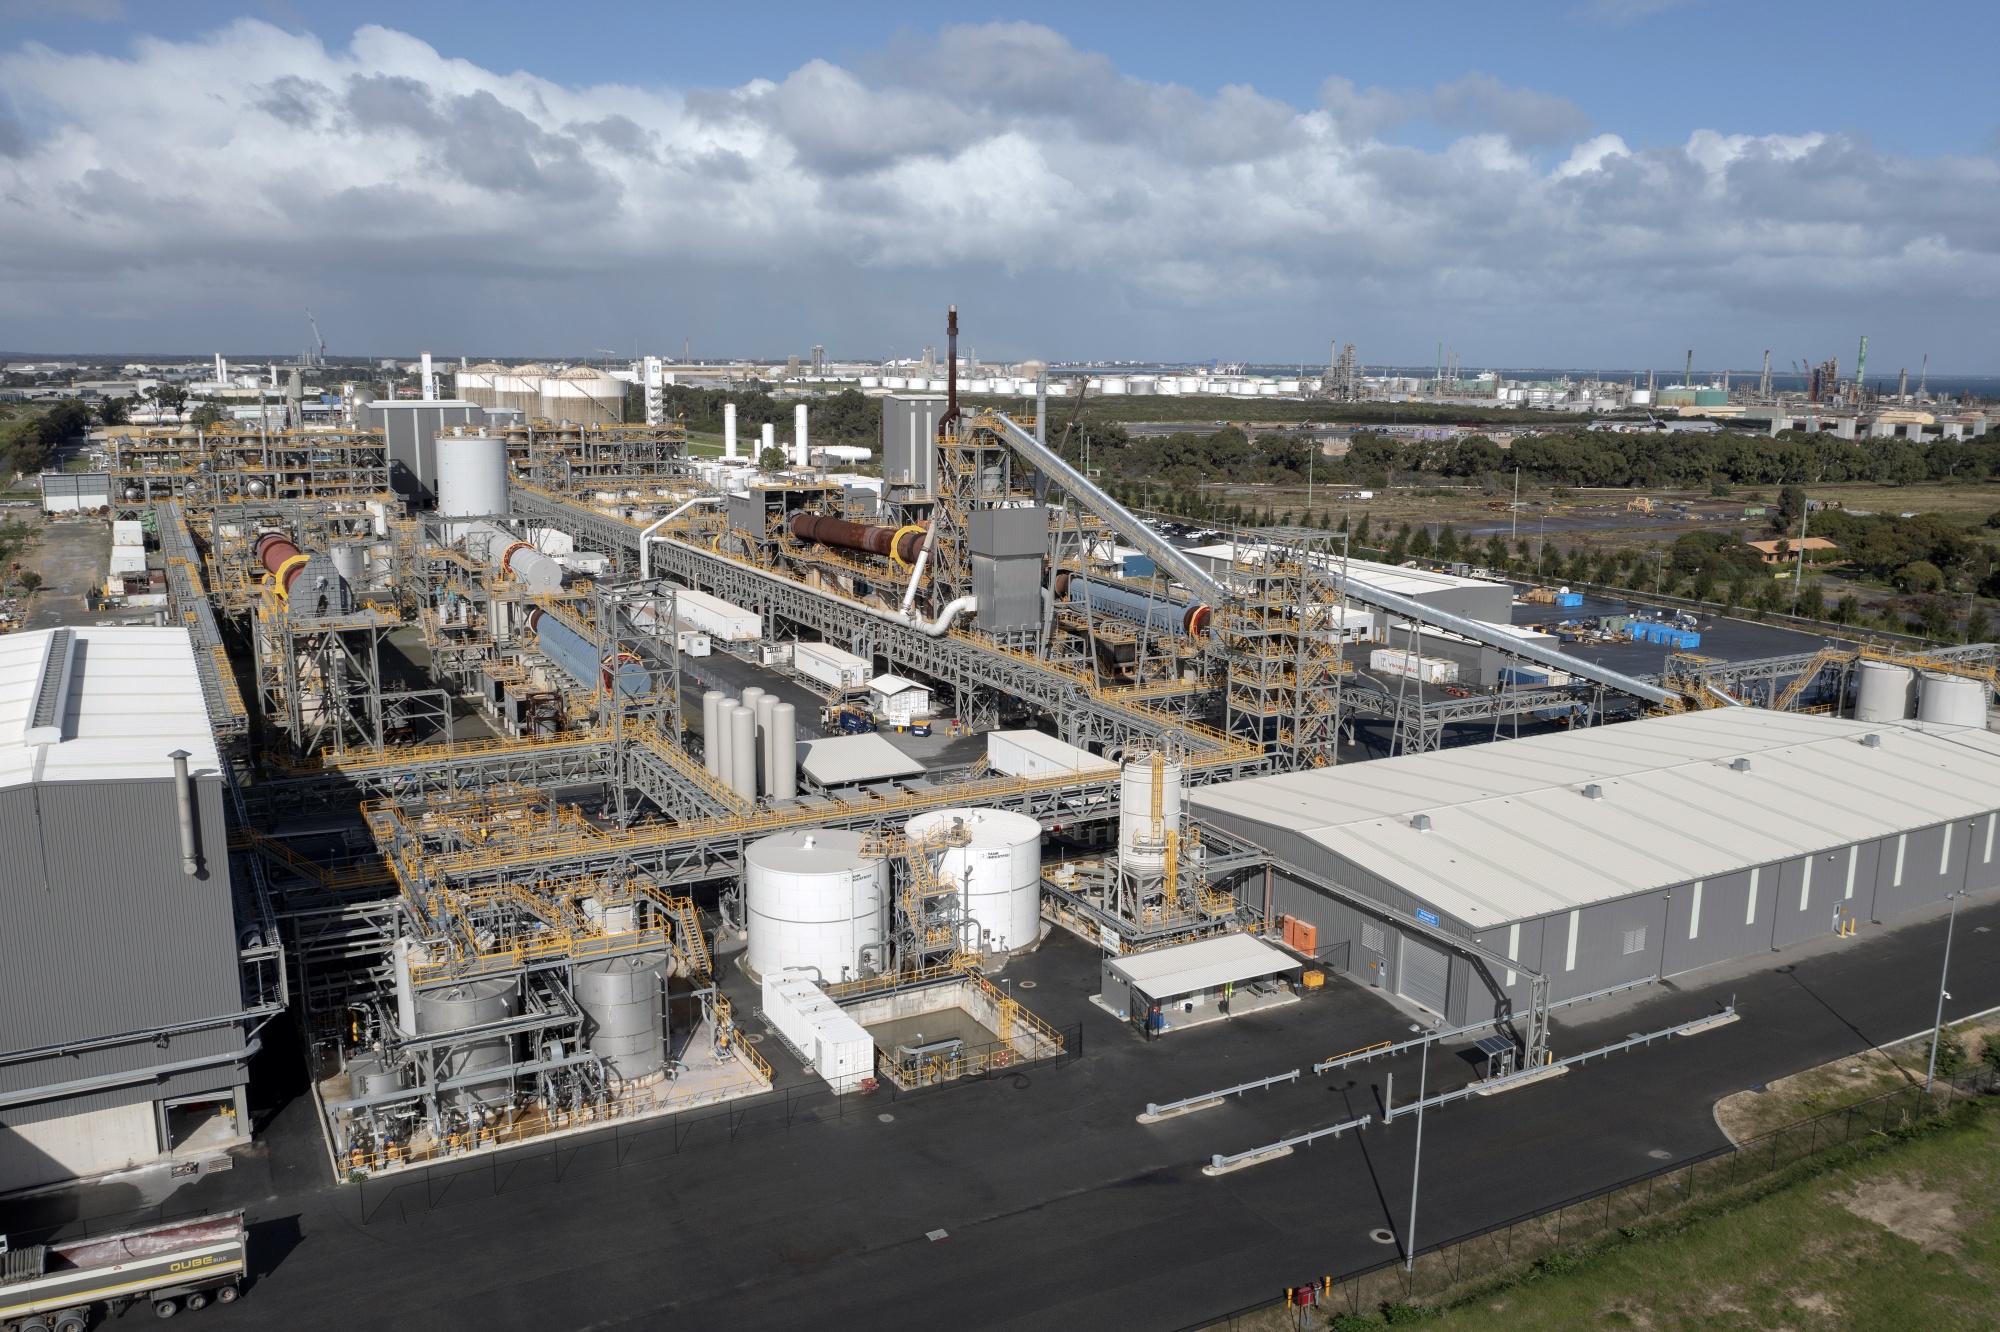 The Tianqi Lithium processing facility in Kwinana, Western Australia.